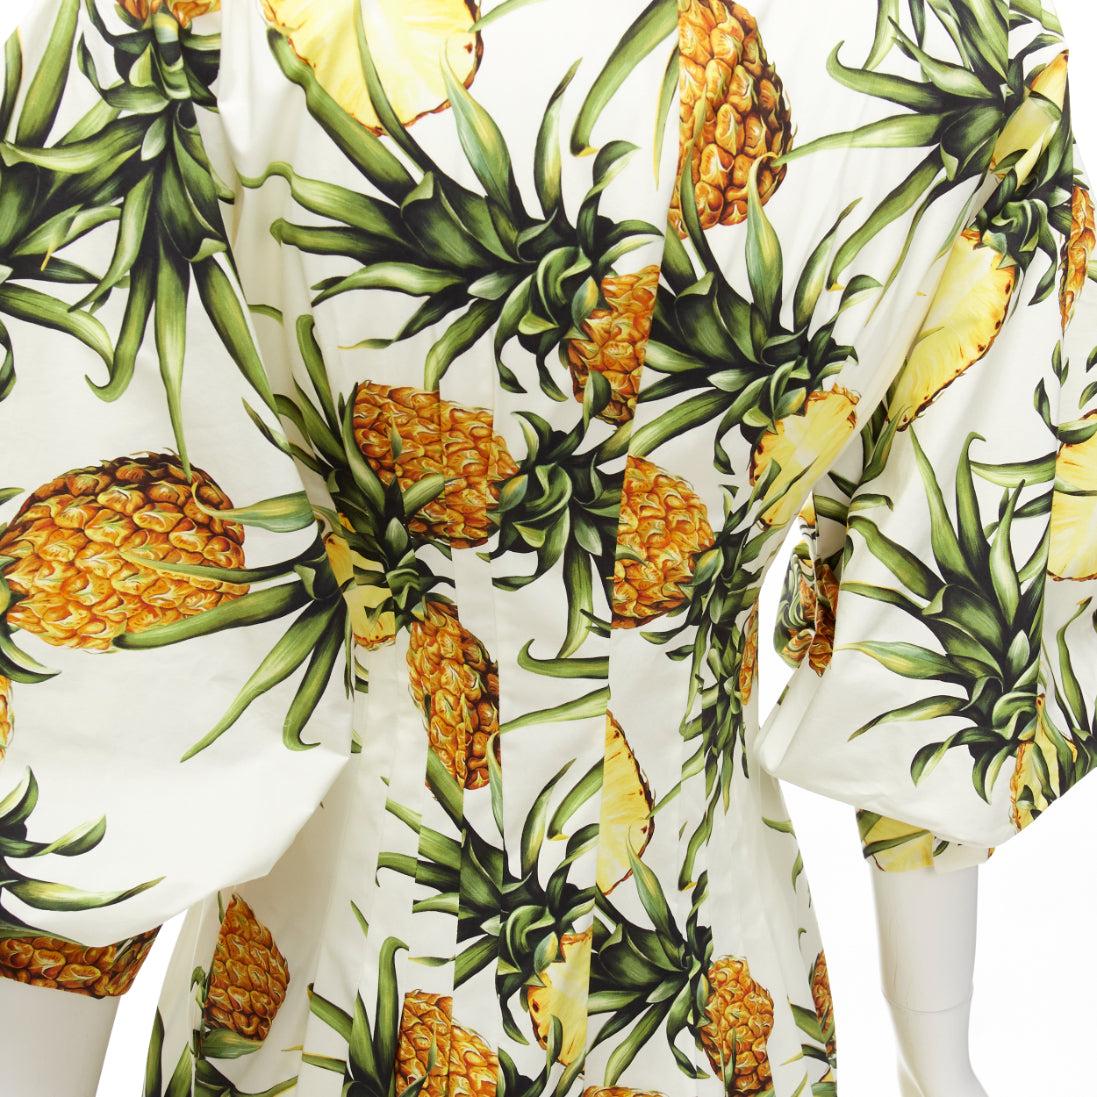 OSCAR DE LA RENTA 2021 yellow white pineapple print puff sleeve dress US2 S
Reference: AAWC/A00708
Brand: Oscar de la Renta
Designer: Oscar De La Renta
Collection: SS 2021
Material: Cotton, Blend
Color: Yellow, White
Pattern: Photographic